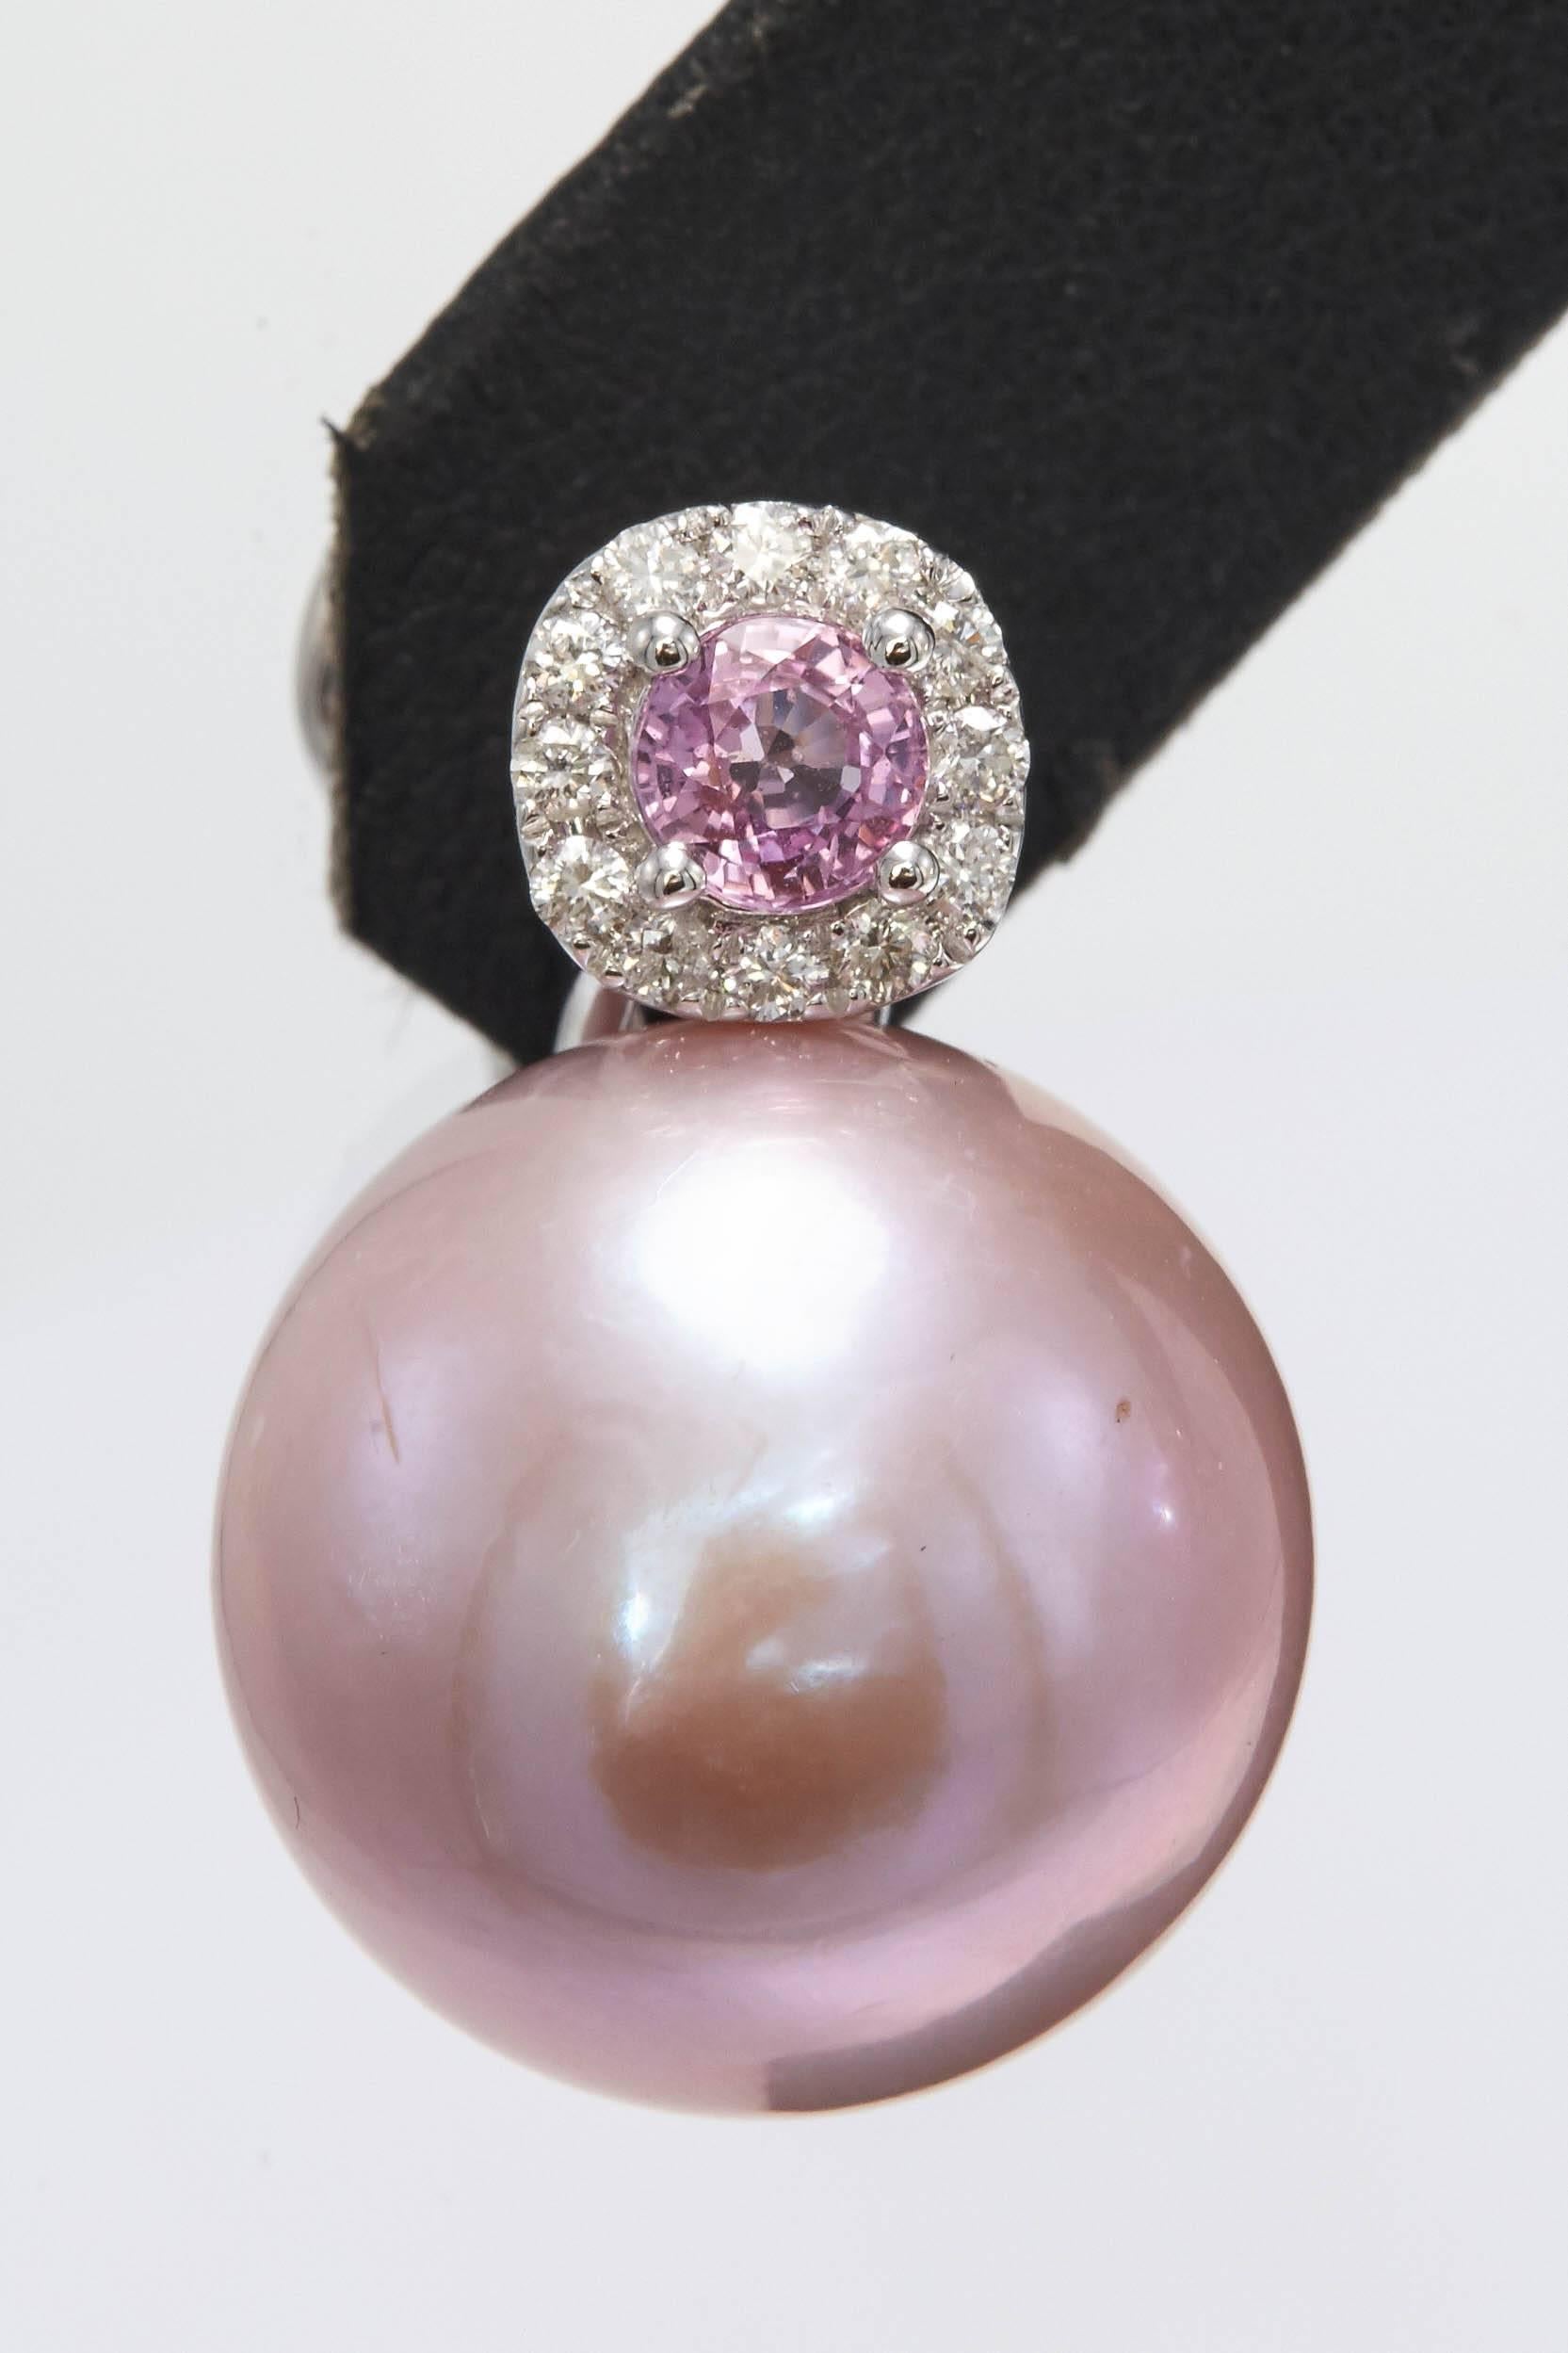 18K white Gold
Pink freshwater pearl 14-15 mm 
Pink Sapphire 0.65 cts.
Diamonds: 0.24 Cts.
